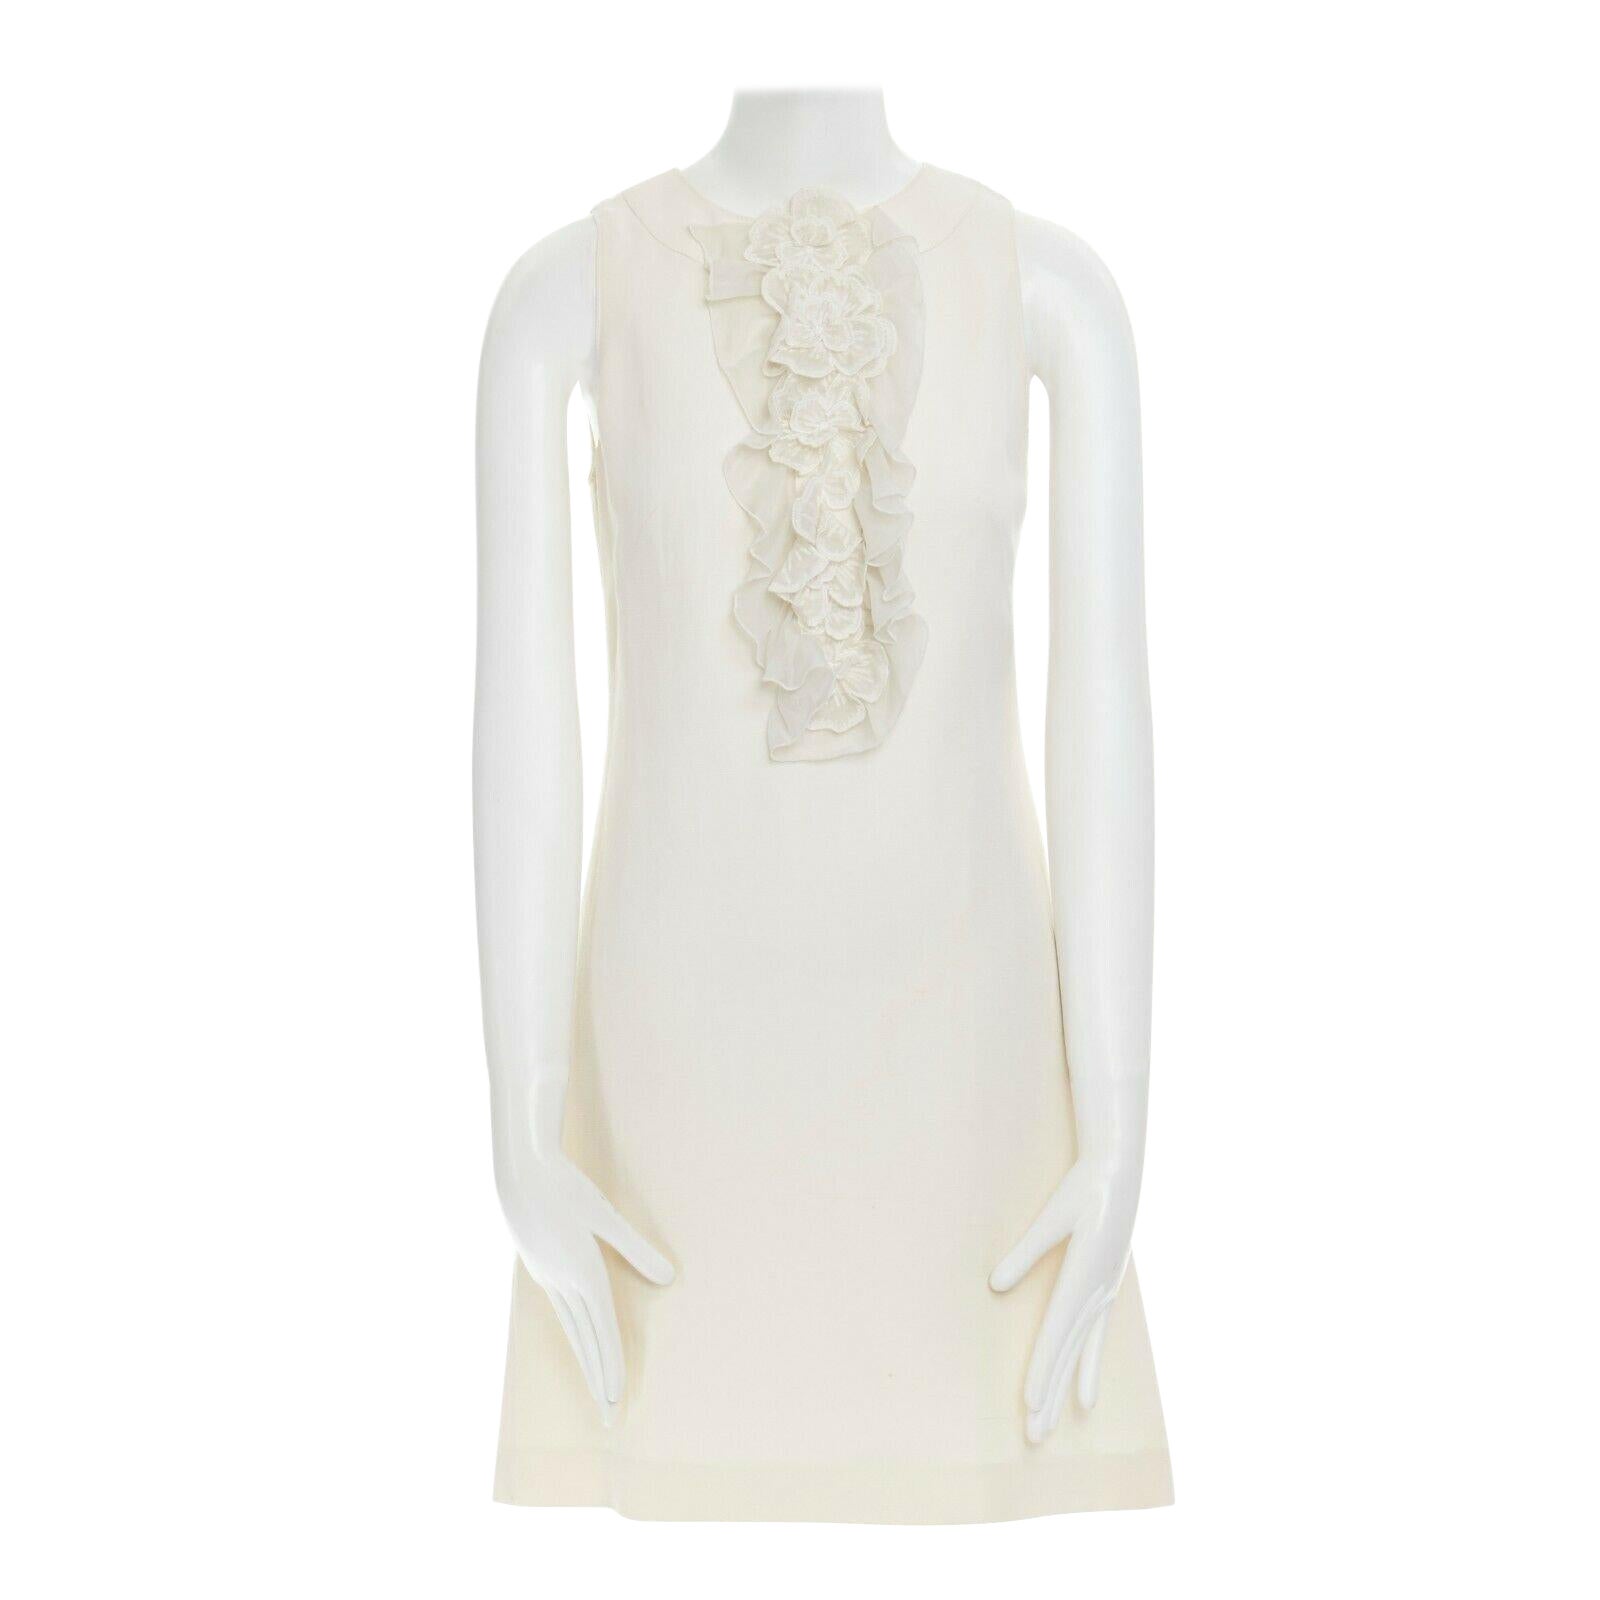 ANDREW GN cream embroider floral petal ruffle front sleeveless shift dress FR34